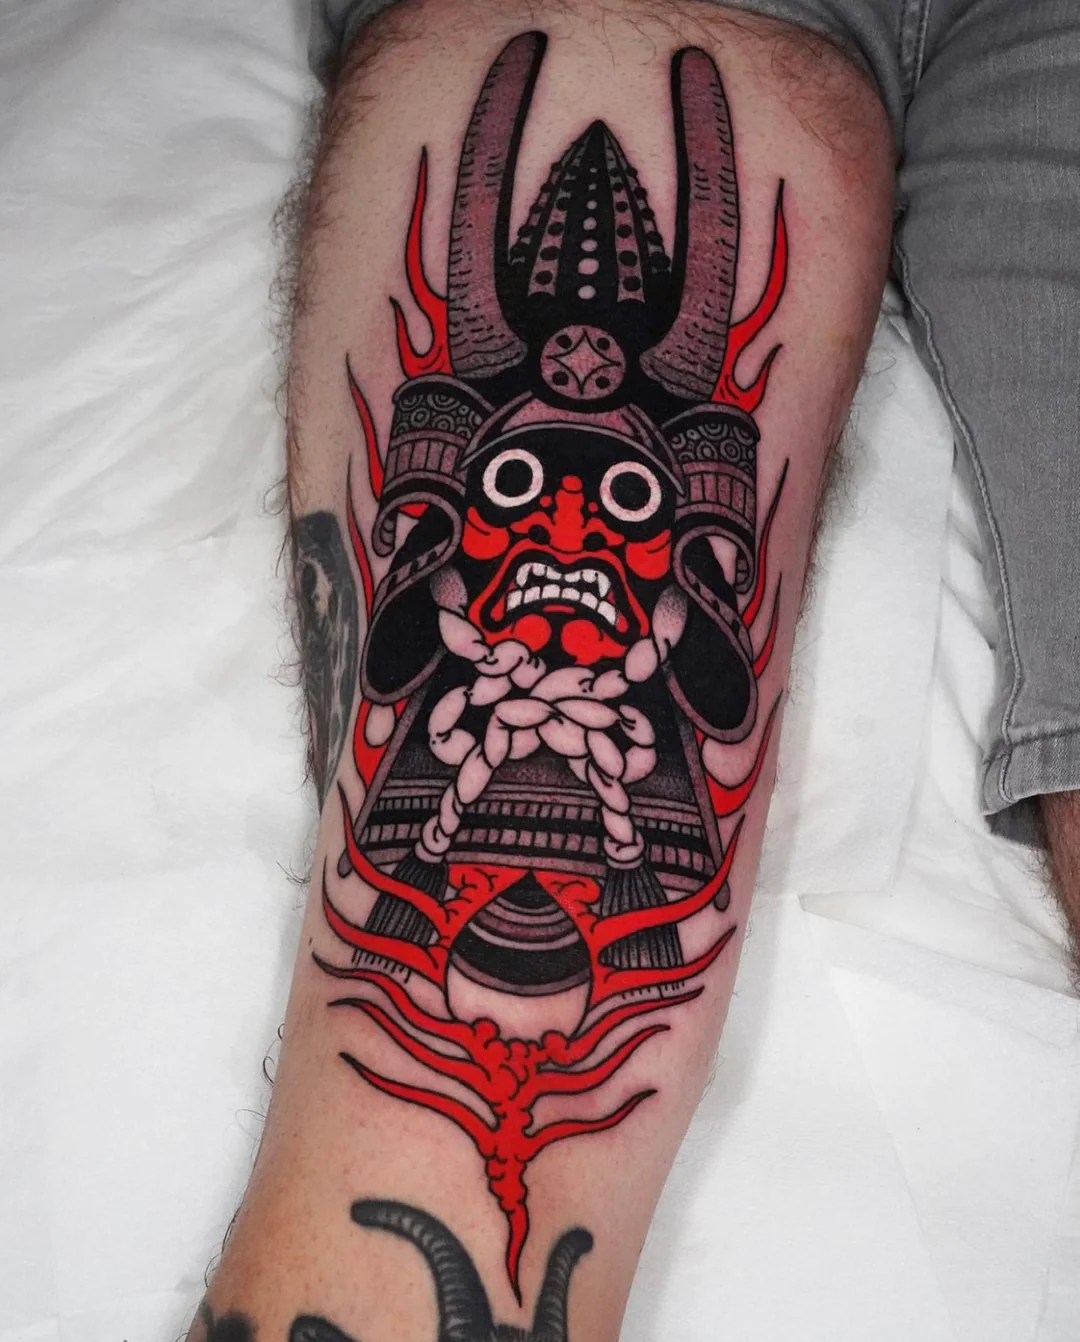 Intricate colour tattoo by Red Point Tattoo, London.